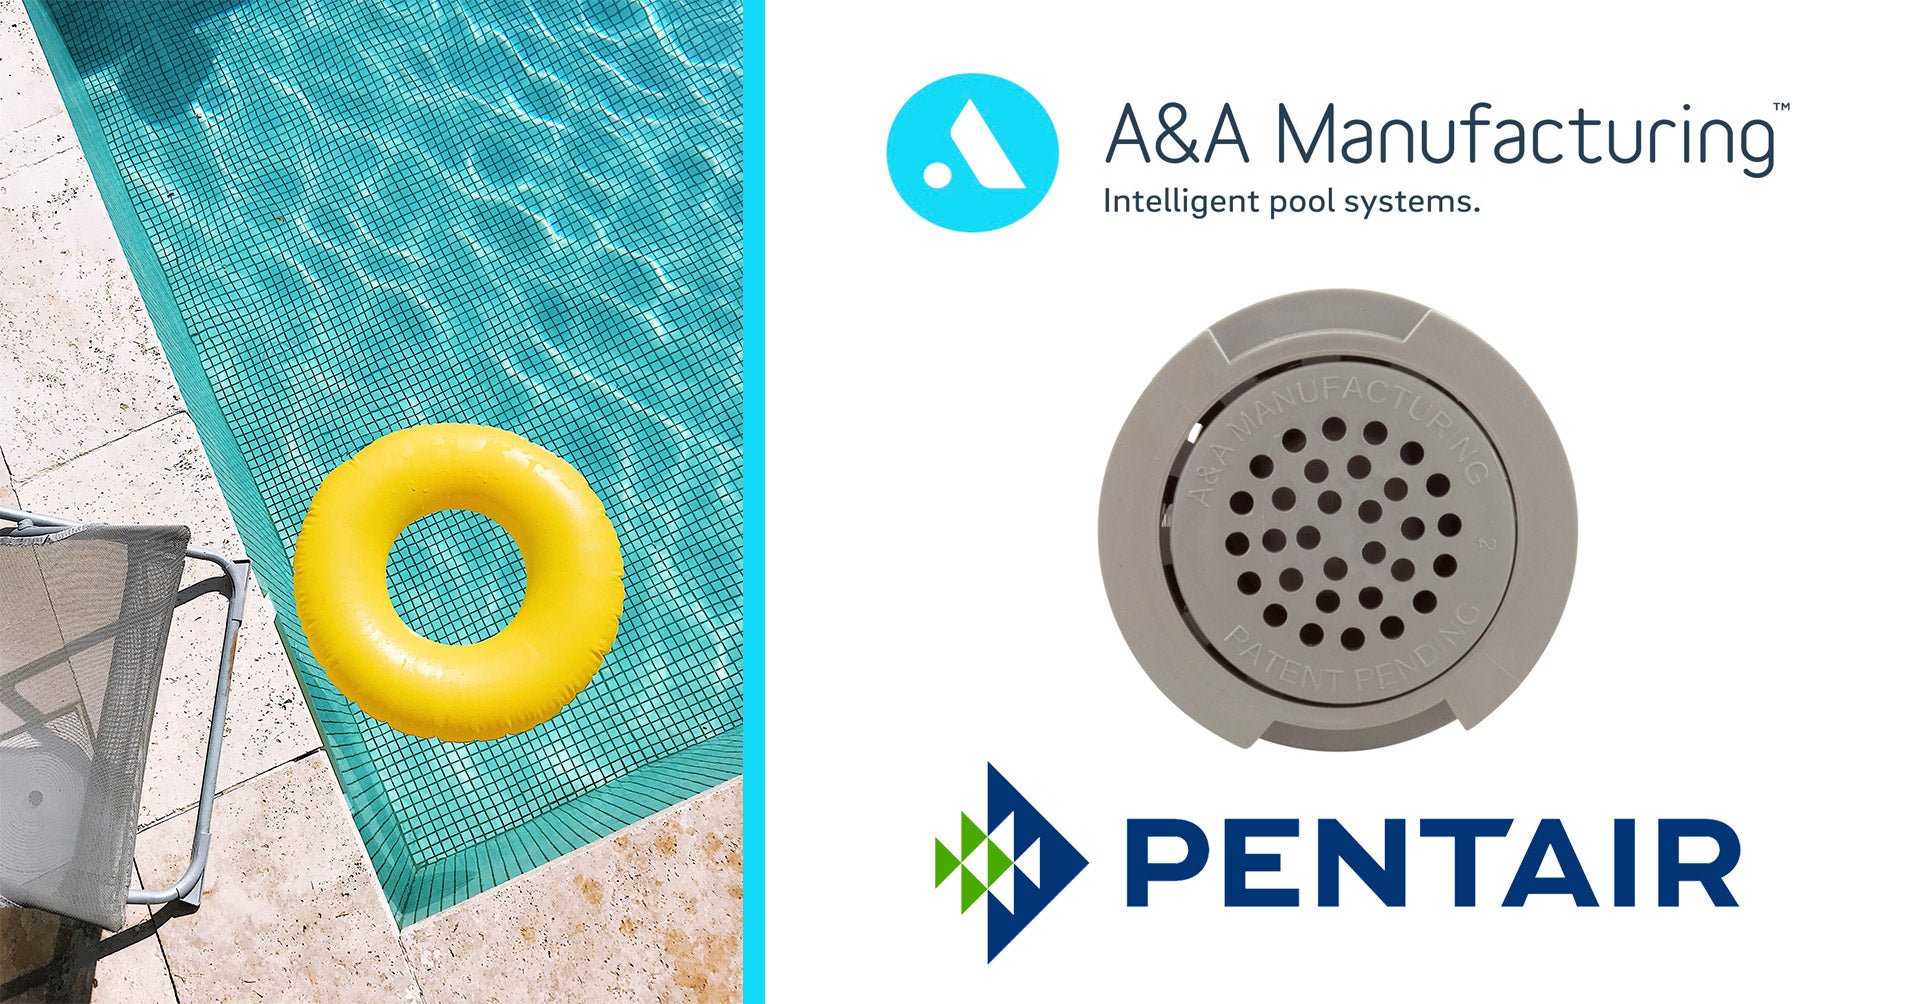 A&A Manufacturing Evolves to Pentair In-Floor - Aqua Pool Supply